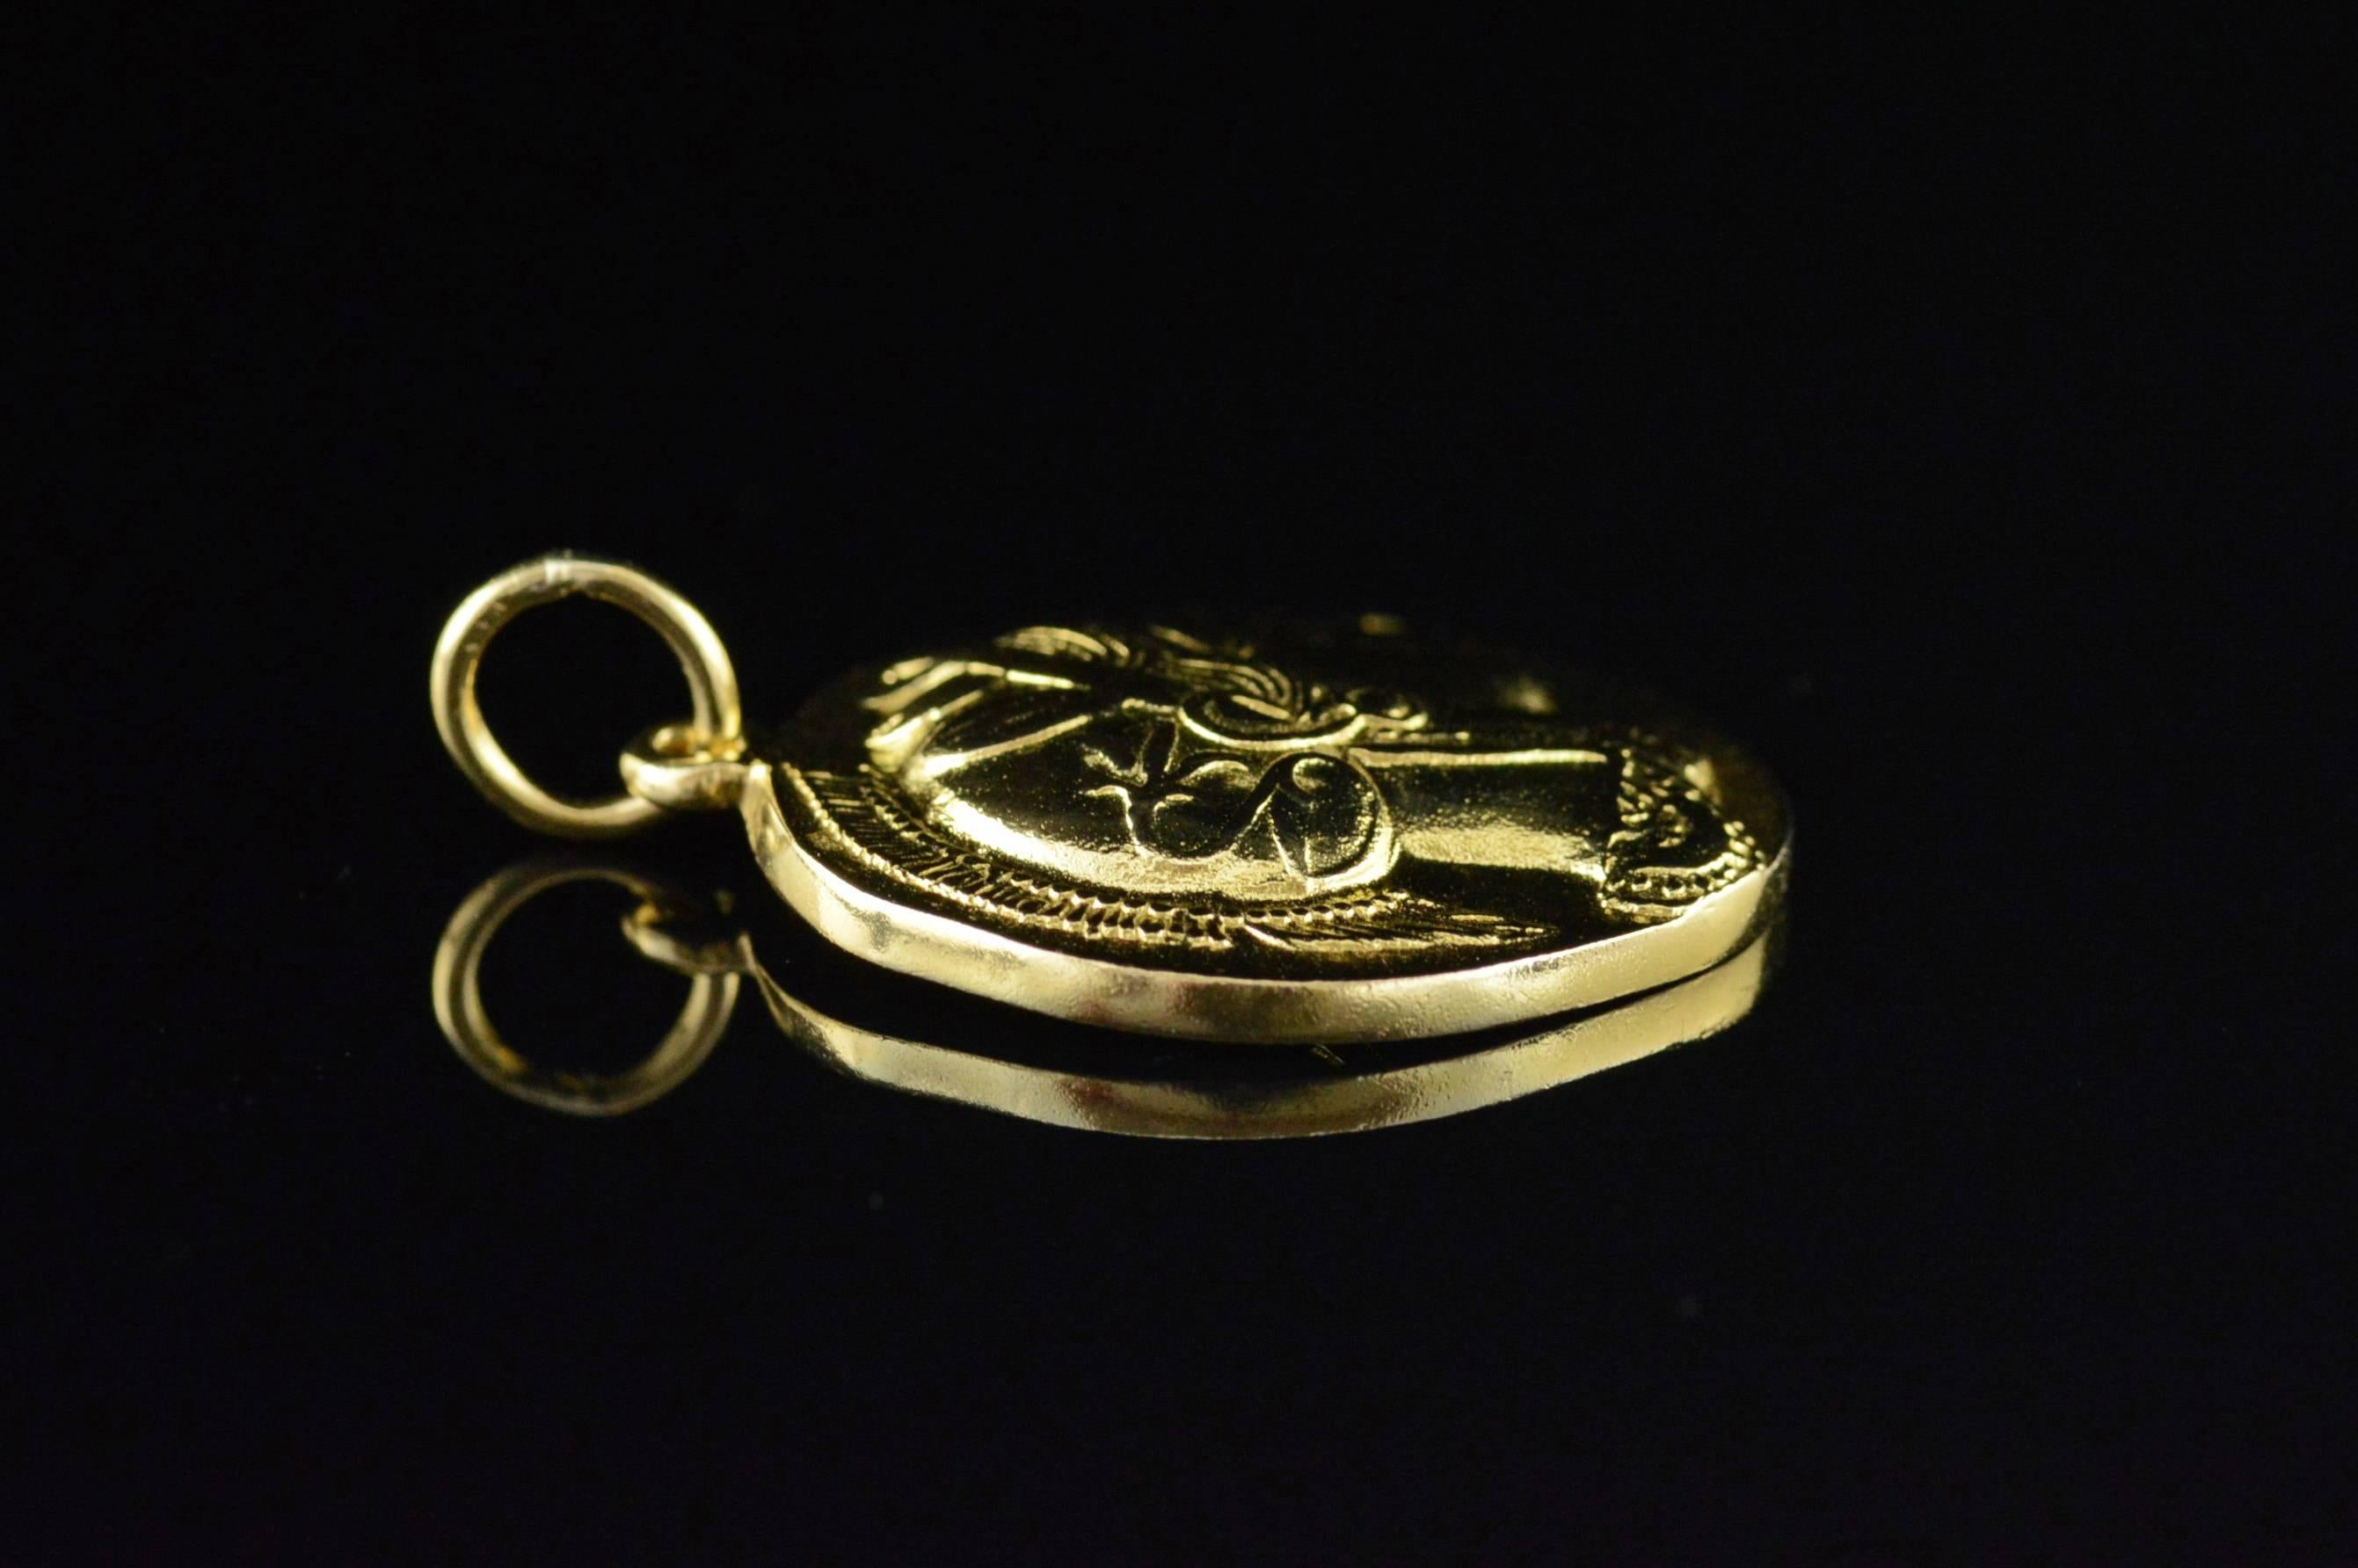 ·Item: 18K Greece Gladiator Tribute Coin Pendant Yellow Gold

·Ear: Modern / 2000s

·Composition: 18k Gold Marked / Tested

·Weight: 7.7g